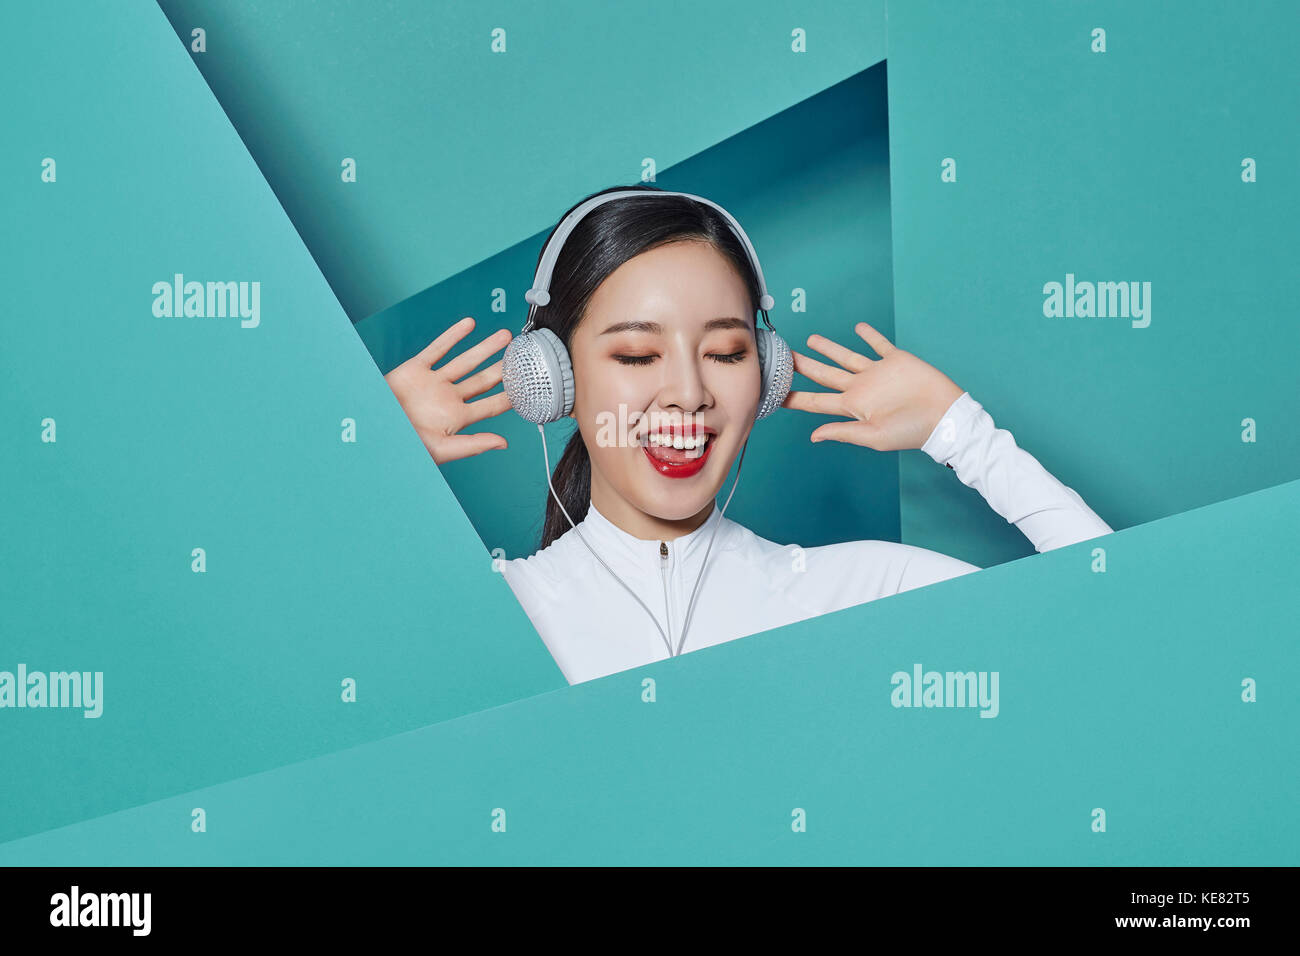 Portrait of young smiling woman listening to music fermant les yeux Banque D'Images